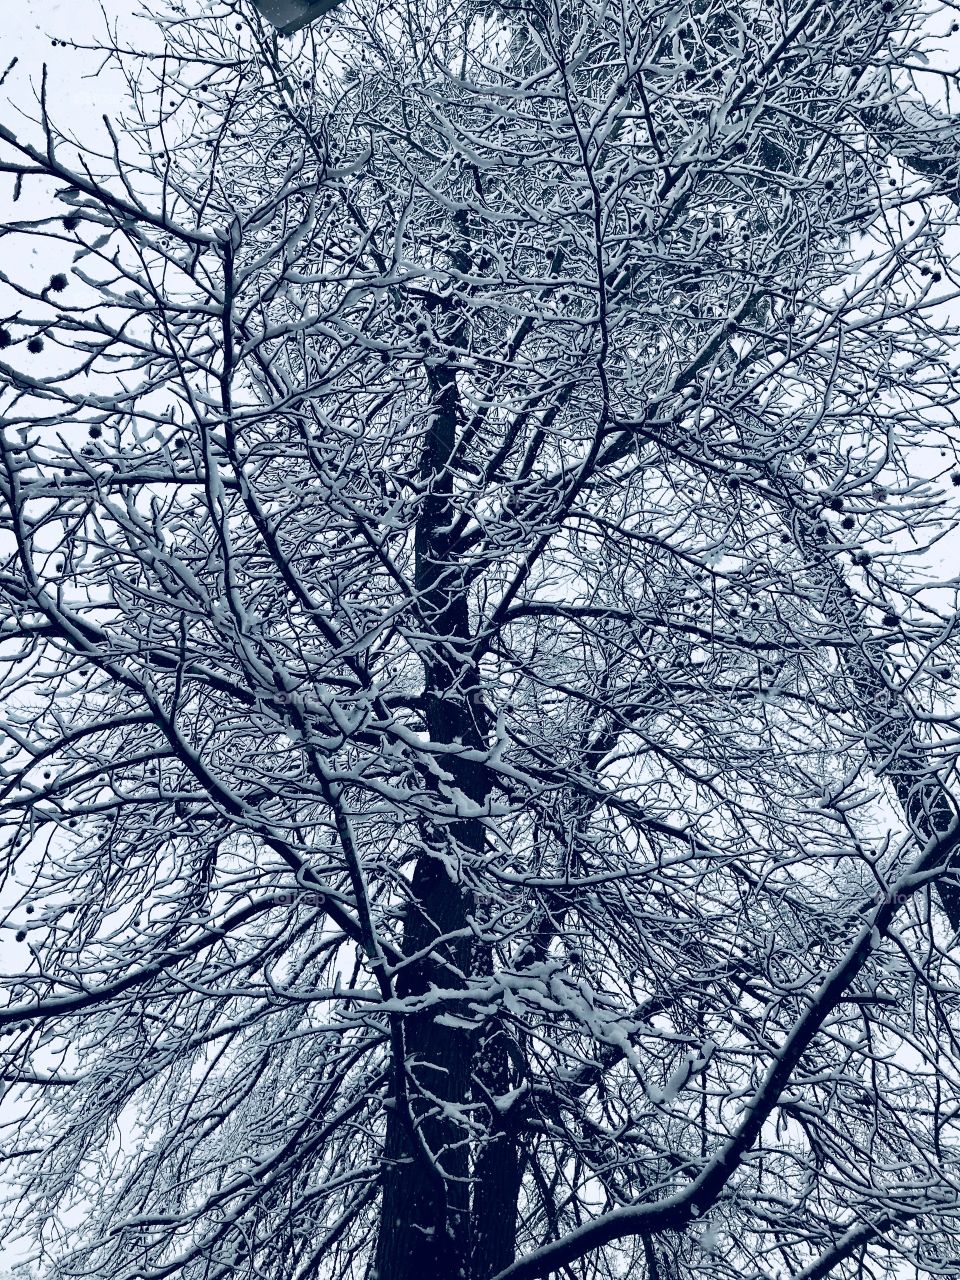 Trees in winter, Sanford NC 2018